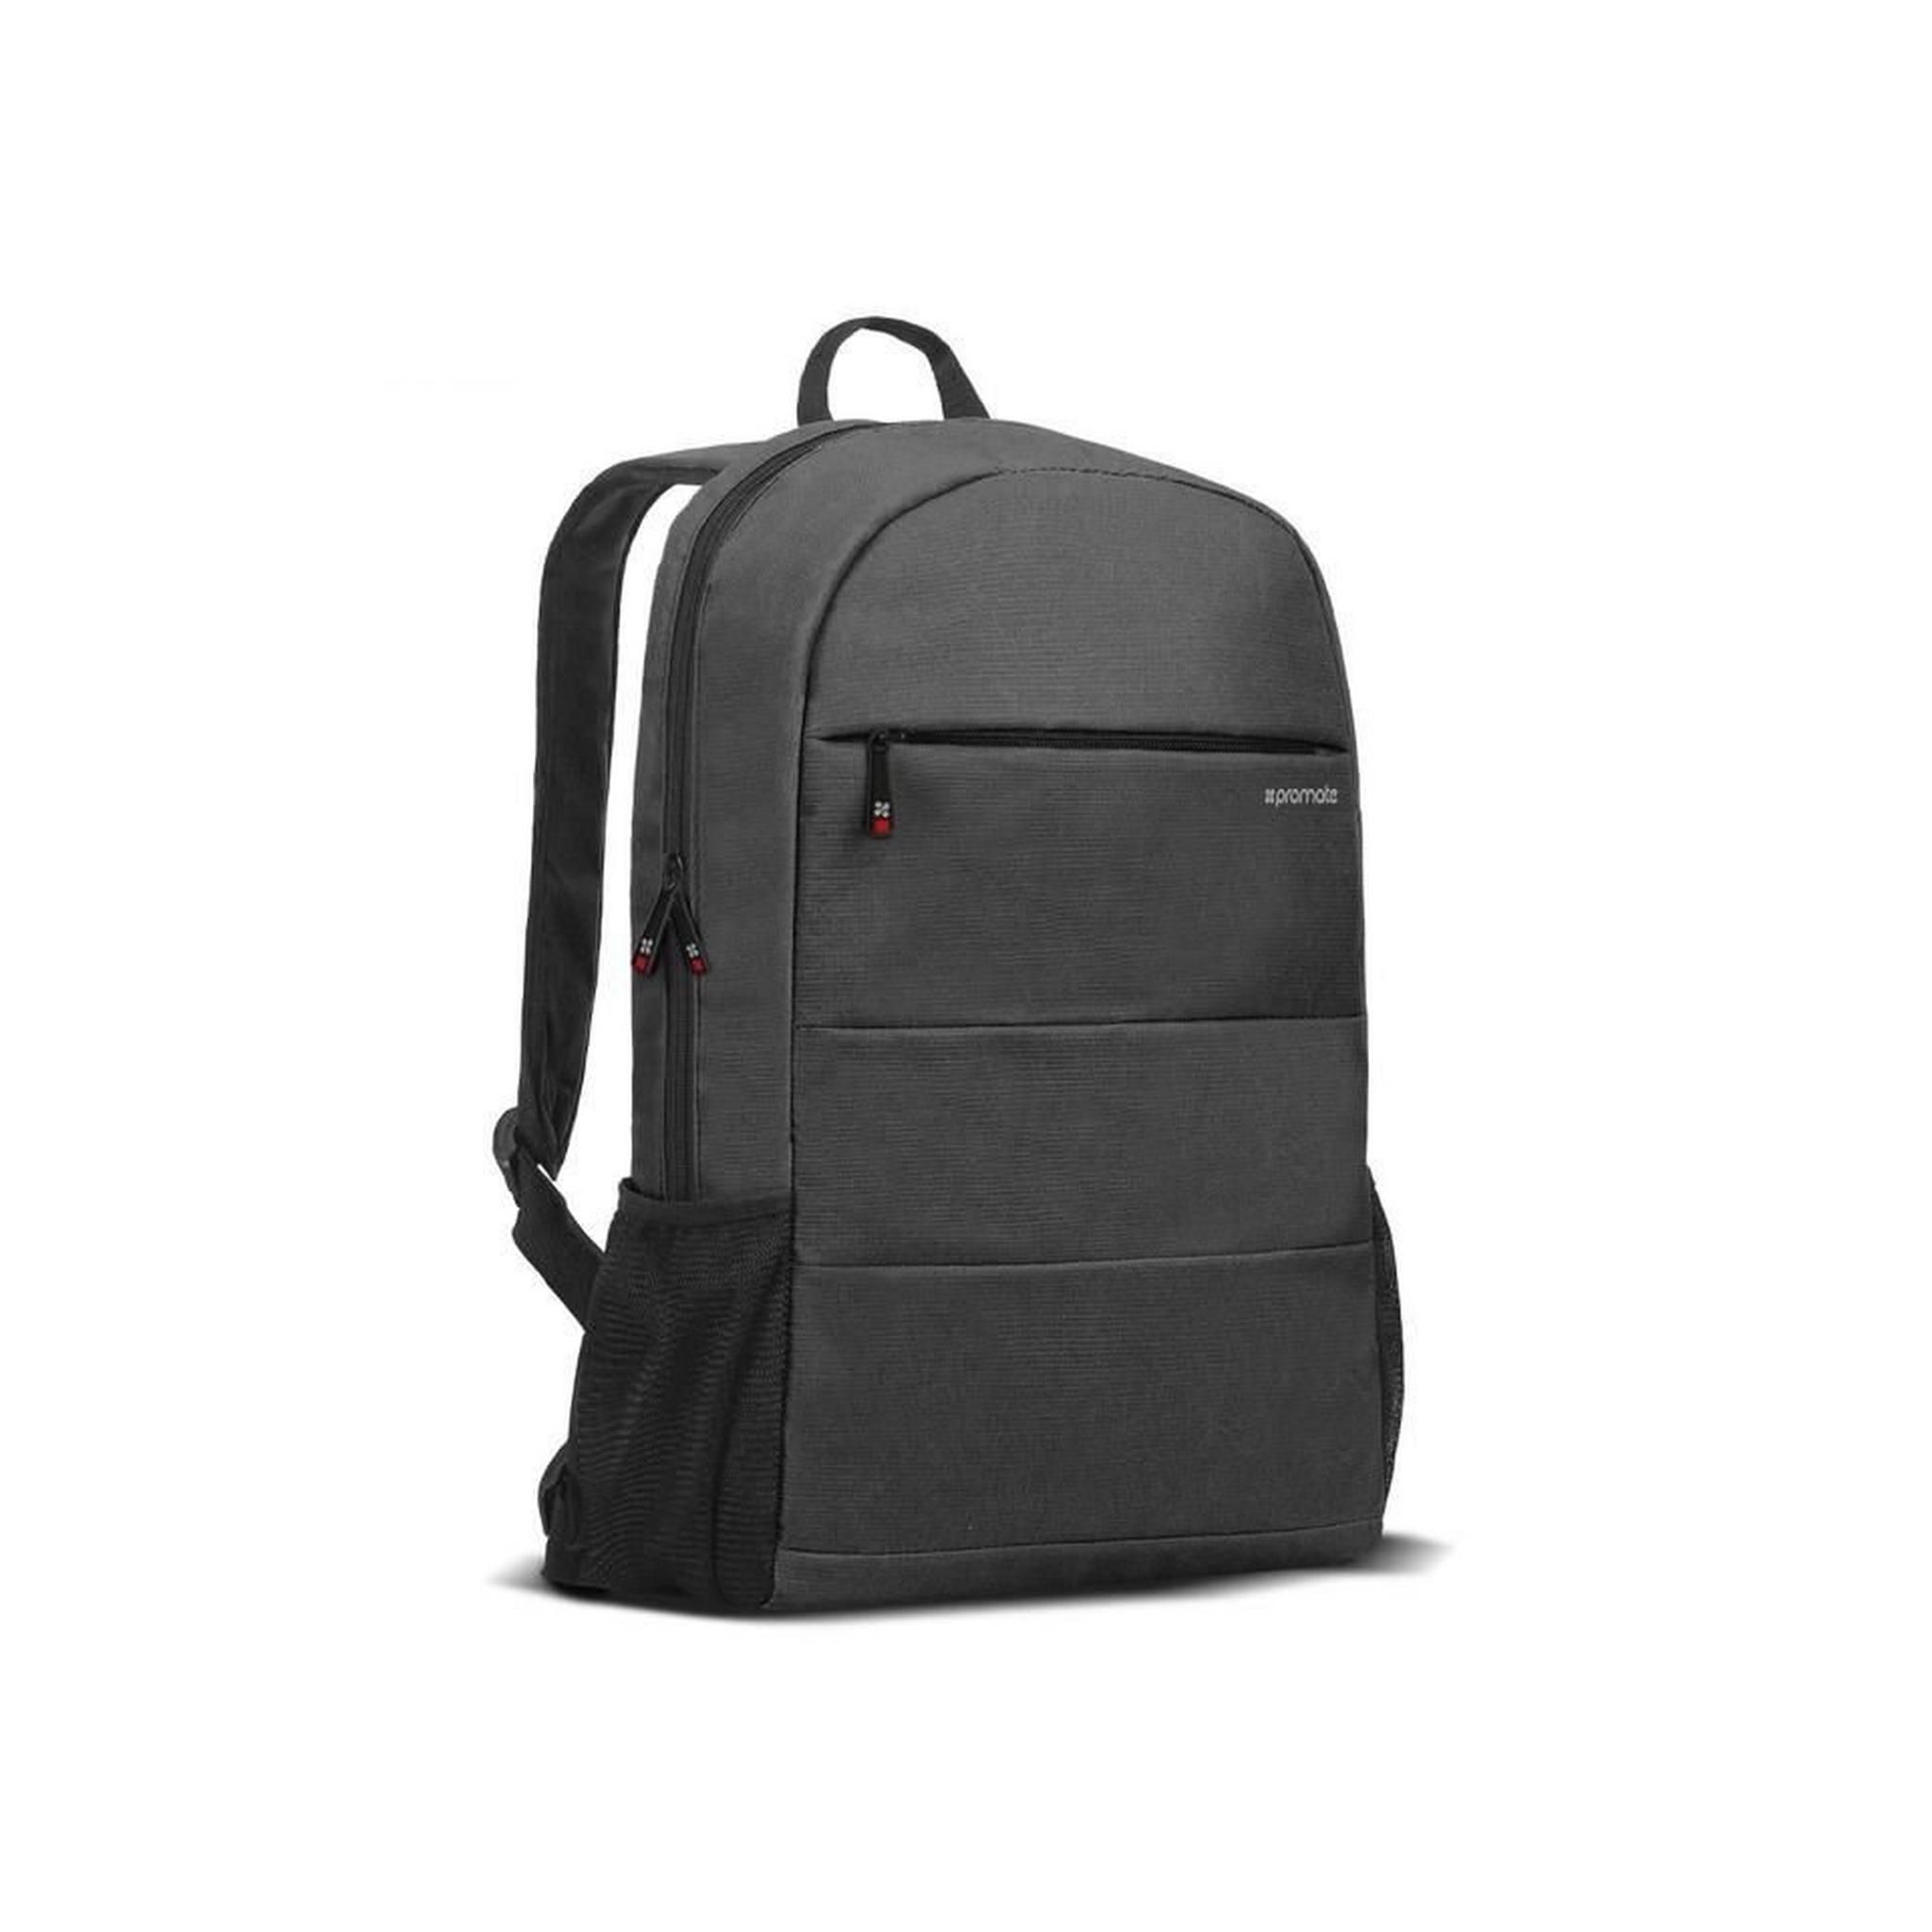 Promate Alpha Anti-Theft 15.6 Inches Laptop Backpack - Black